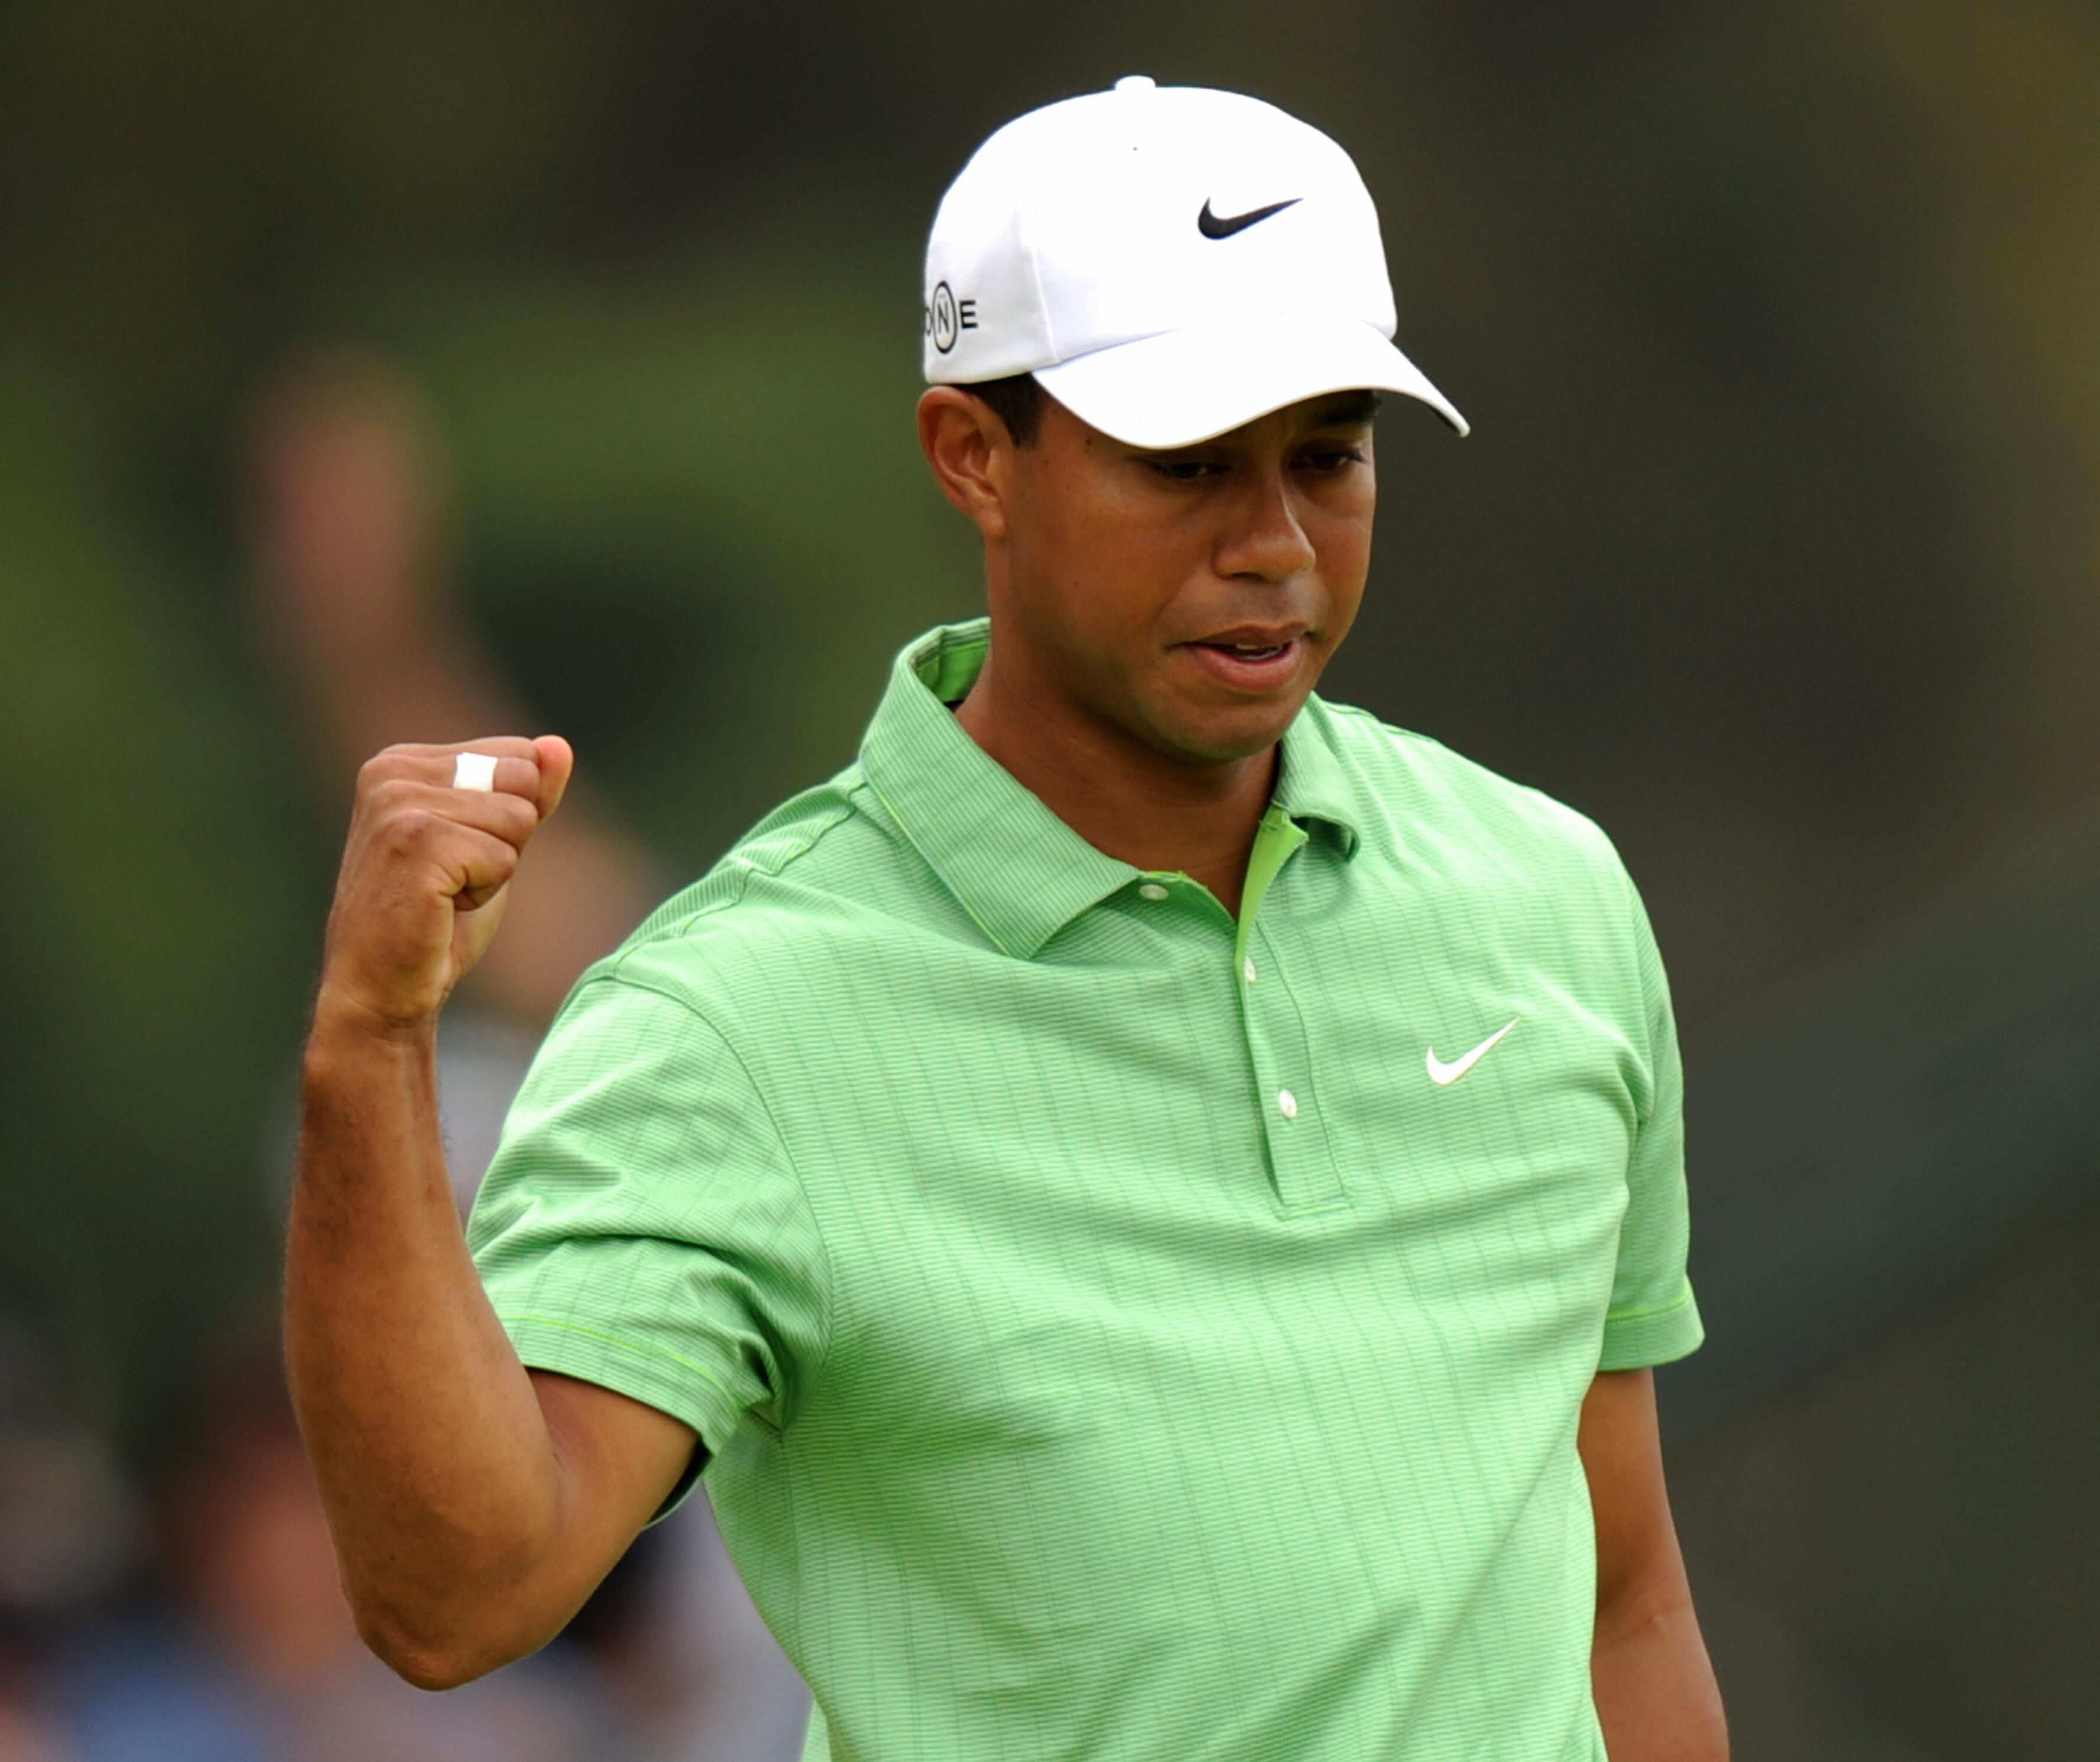 Tiger Woods Net Worth: How Much He Made from His Nike Deal